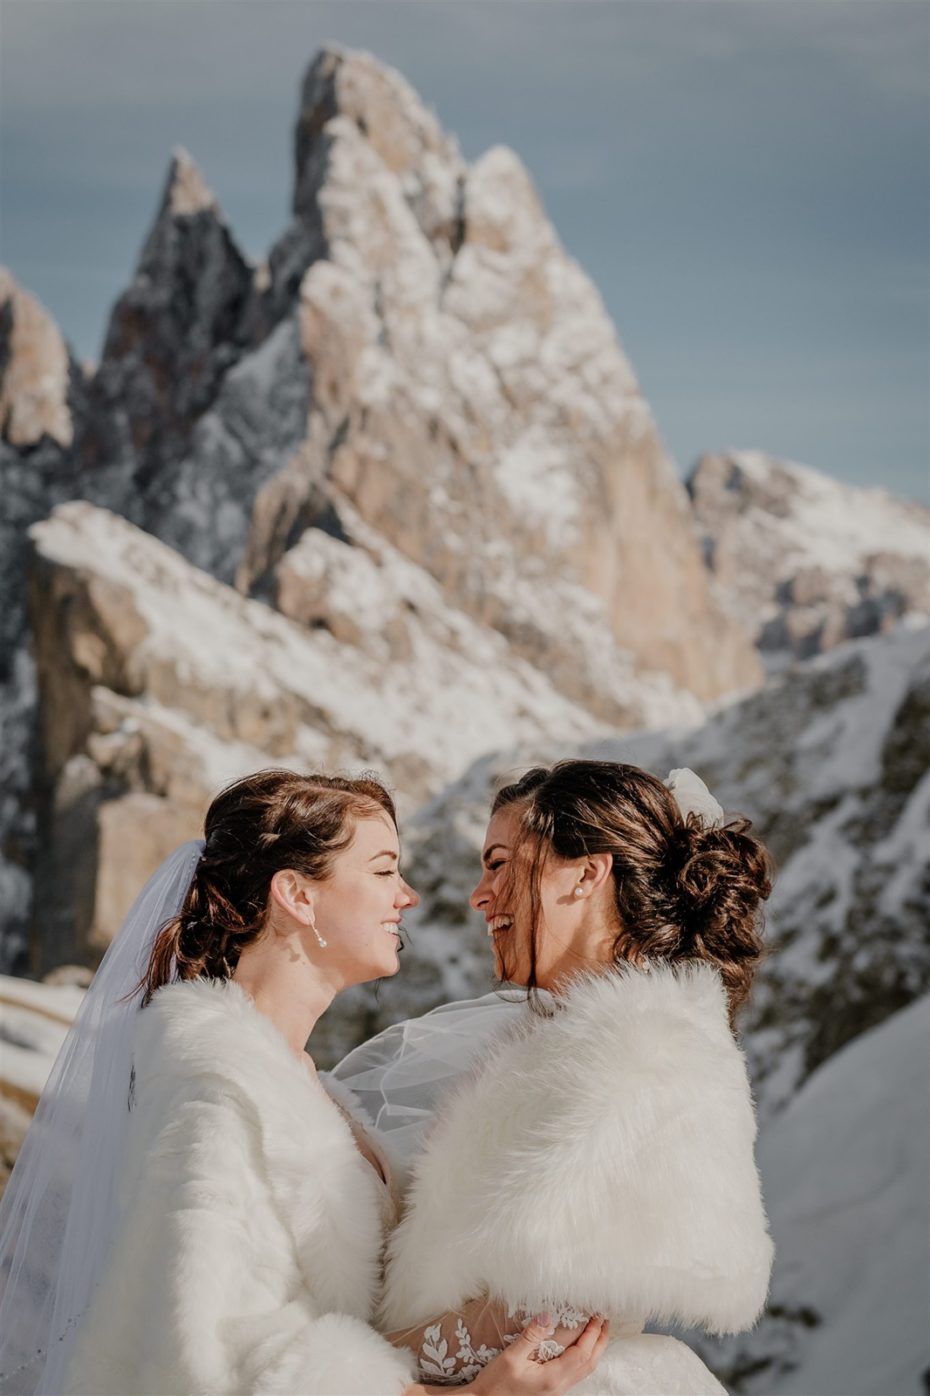 Two brides laugh and embrace in front of Seceda mountain in the Dolomites in winter